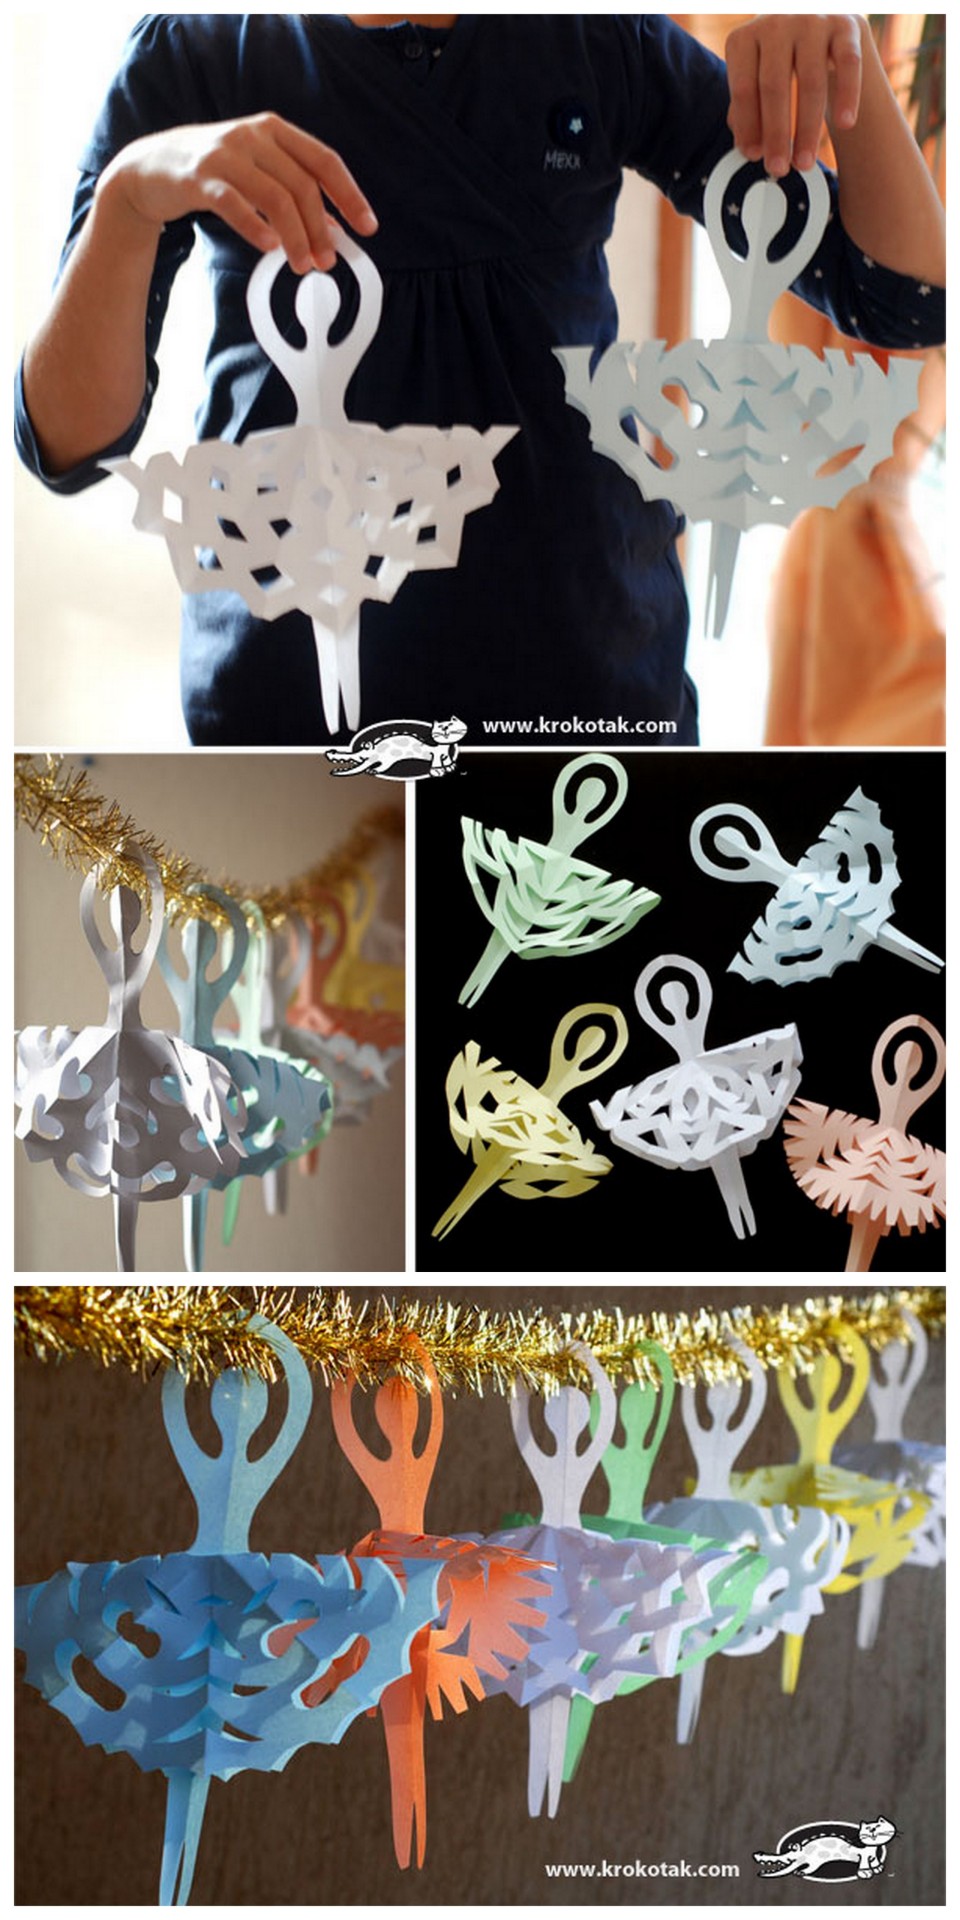 DIY Ballerina Snowflake Tutorial and Template from Krokotak here. For 56 Star Wars snowflake templates and other DIY snowflakes (Game of Thrones, zombies, Tardis etc…) go here: truebluemeandyou.tumblr.com/tagged/snowflakes